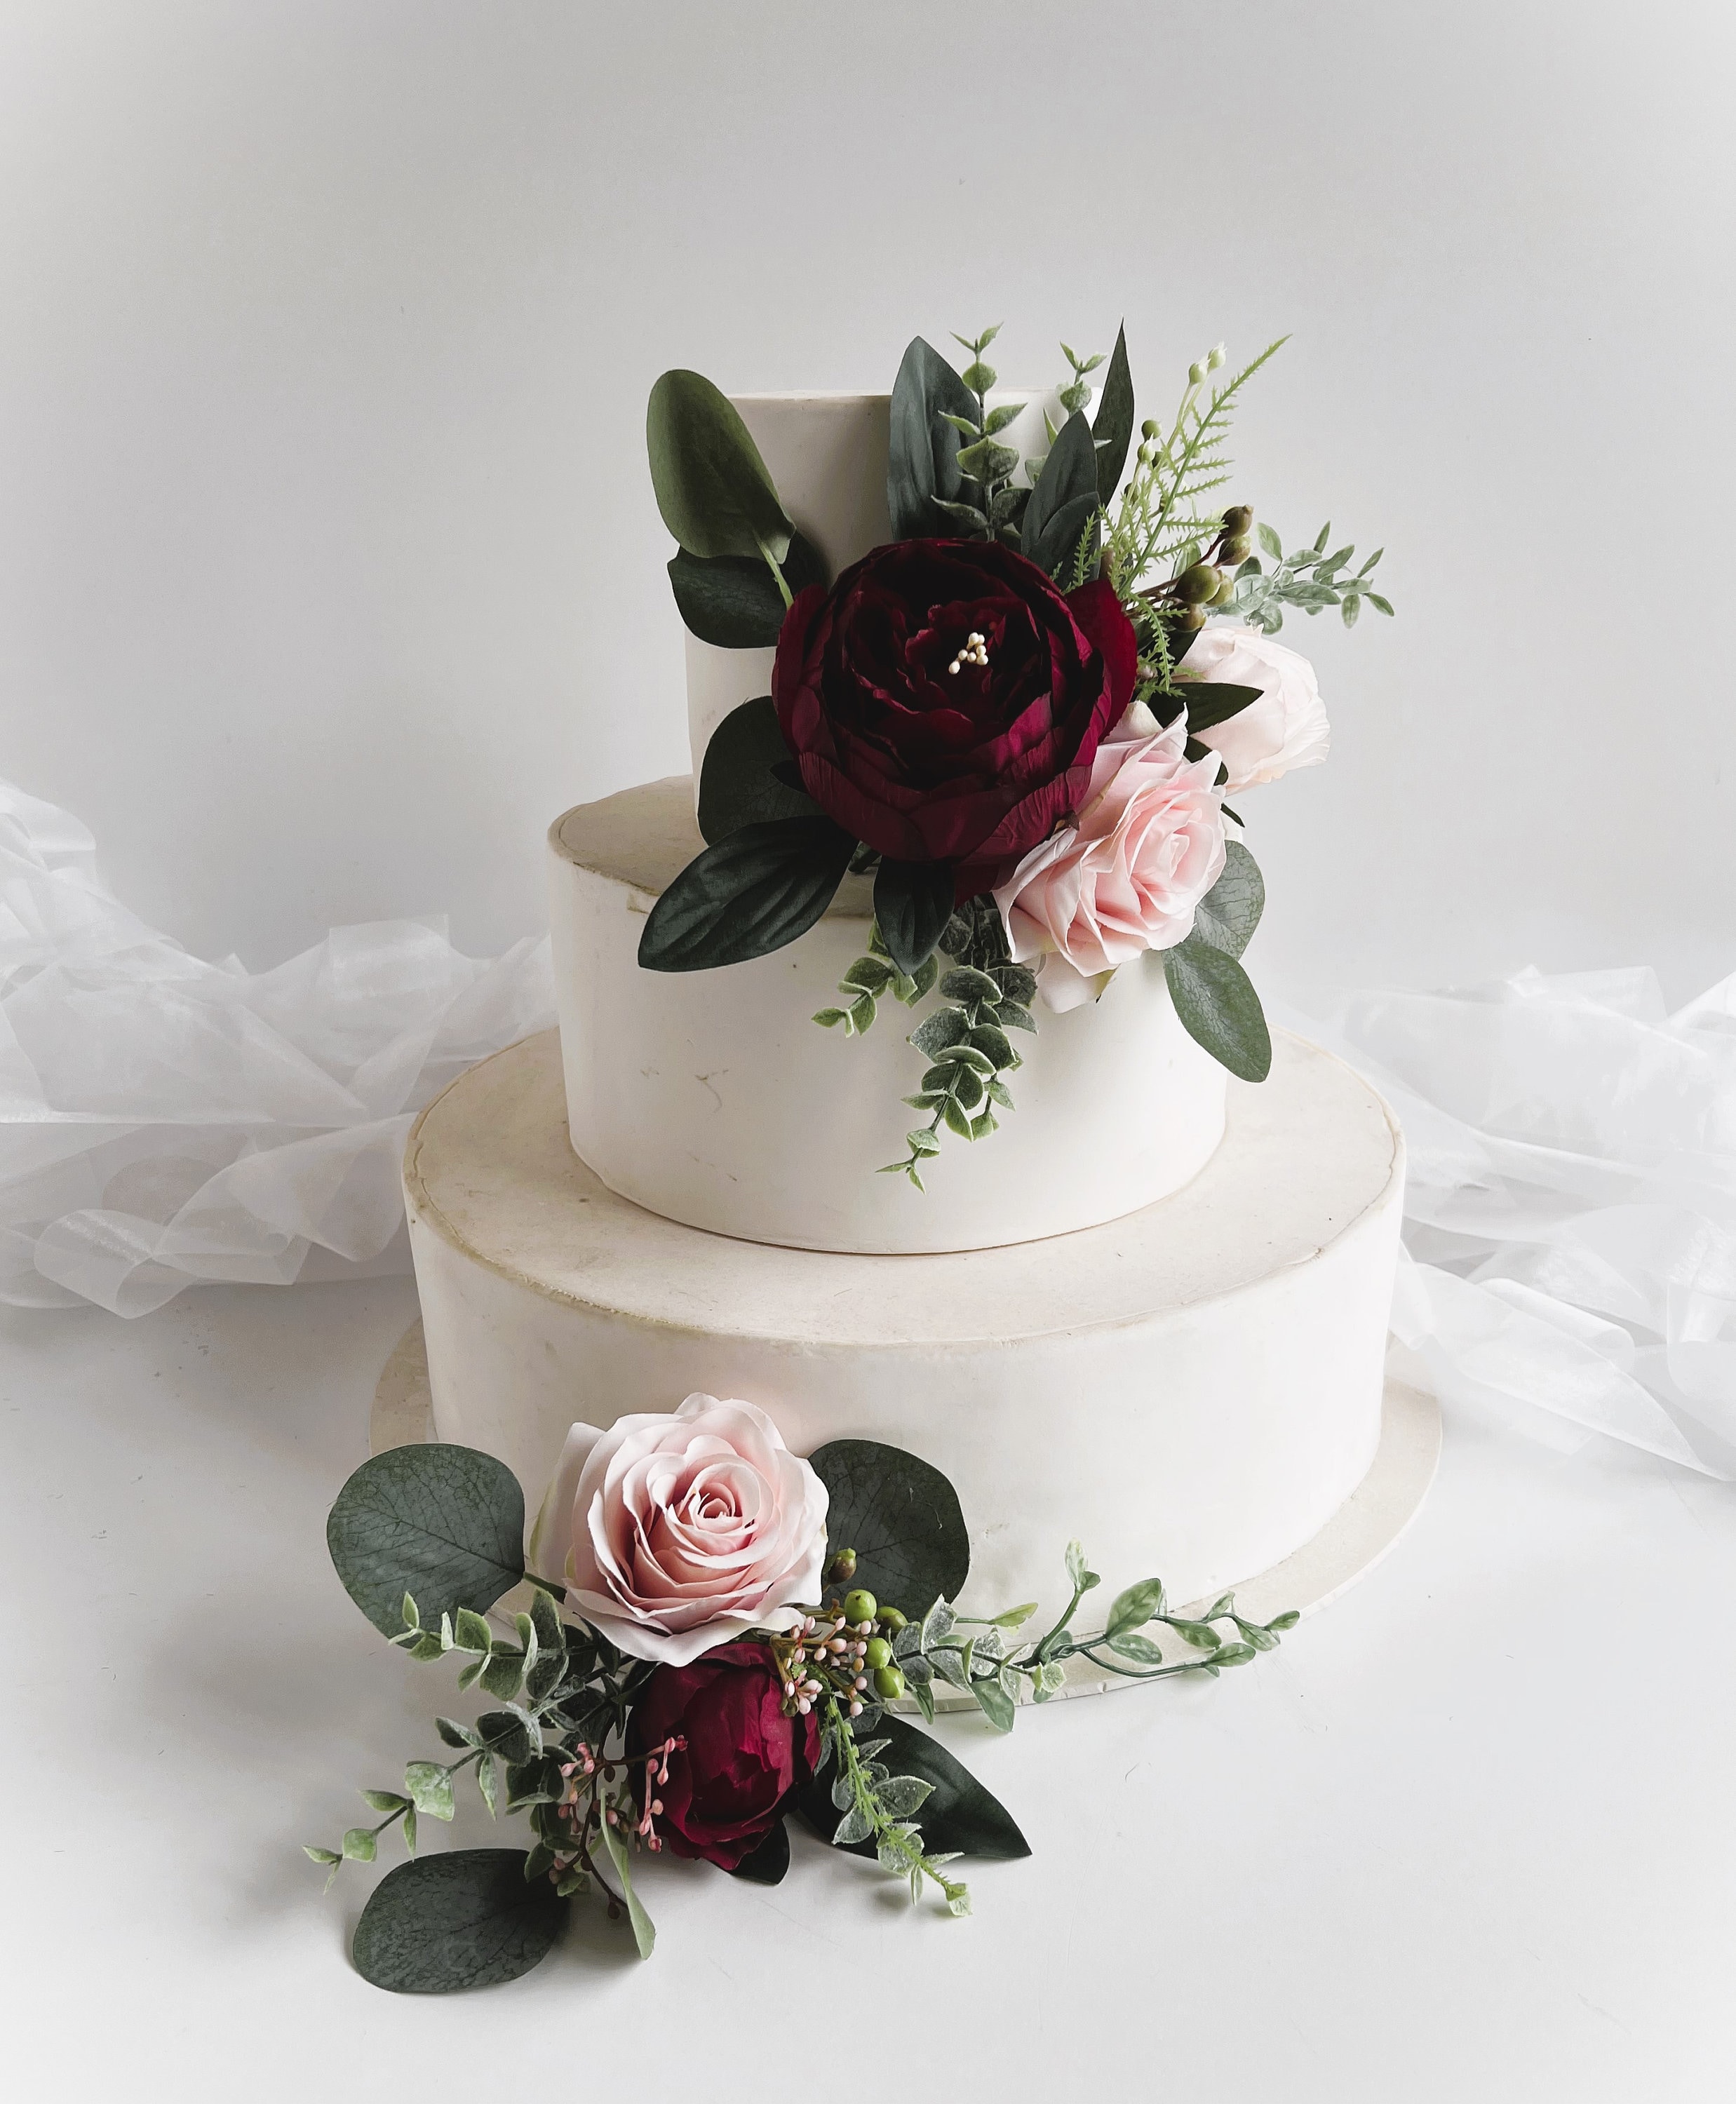 11 Fall Wedding Cakes That Have Us Drooling – SheKnows